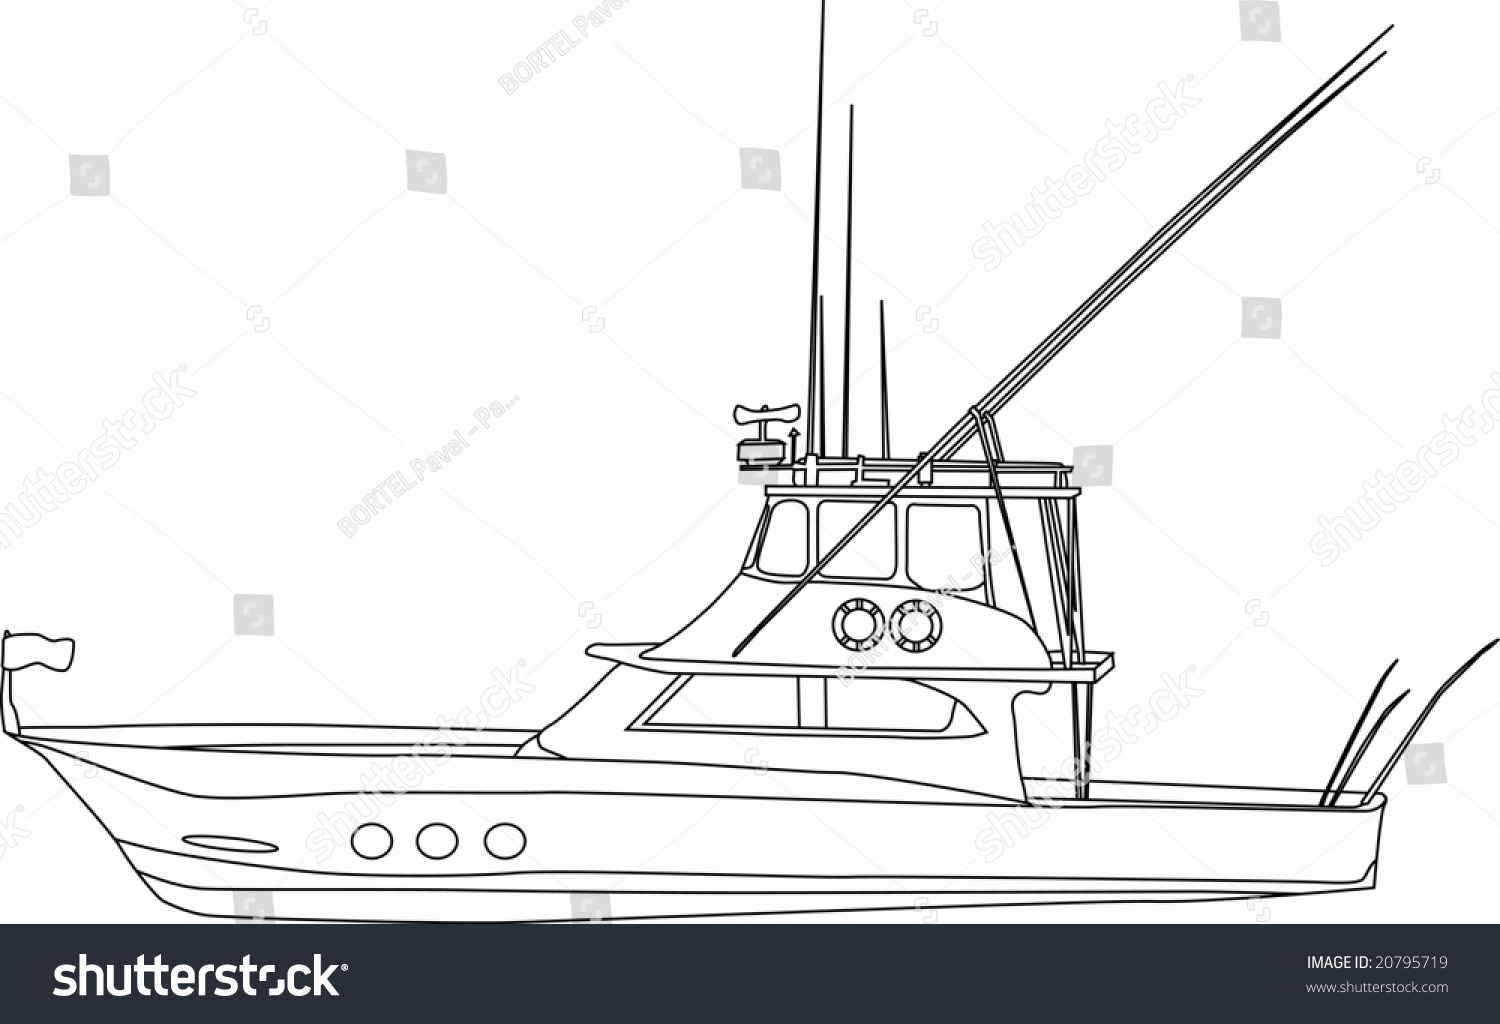 Download Vector Contour Fishing Boat Isolated On Stock Vector ...